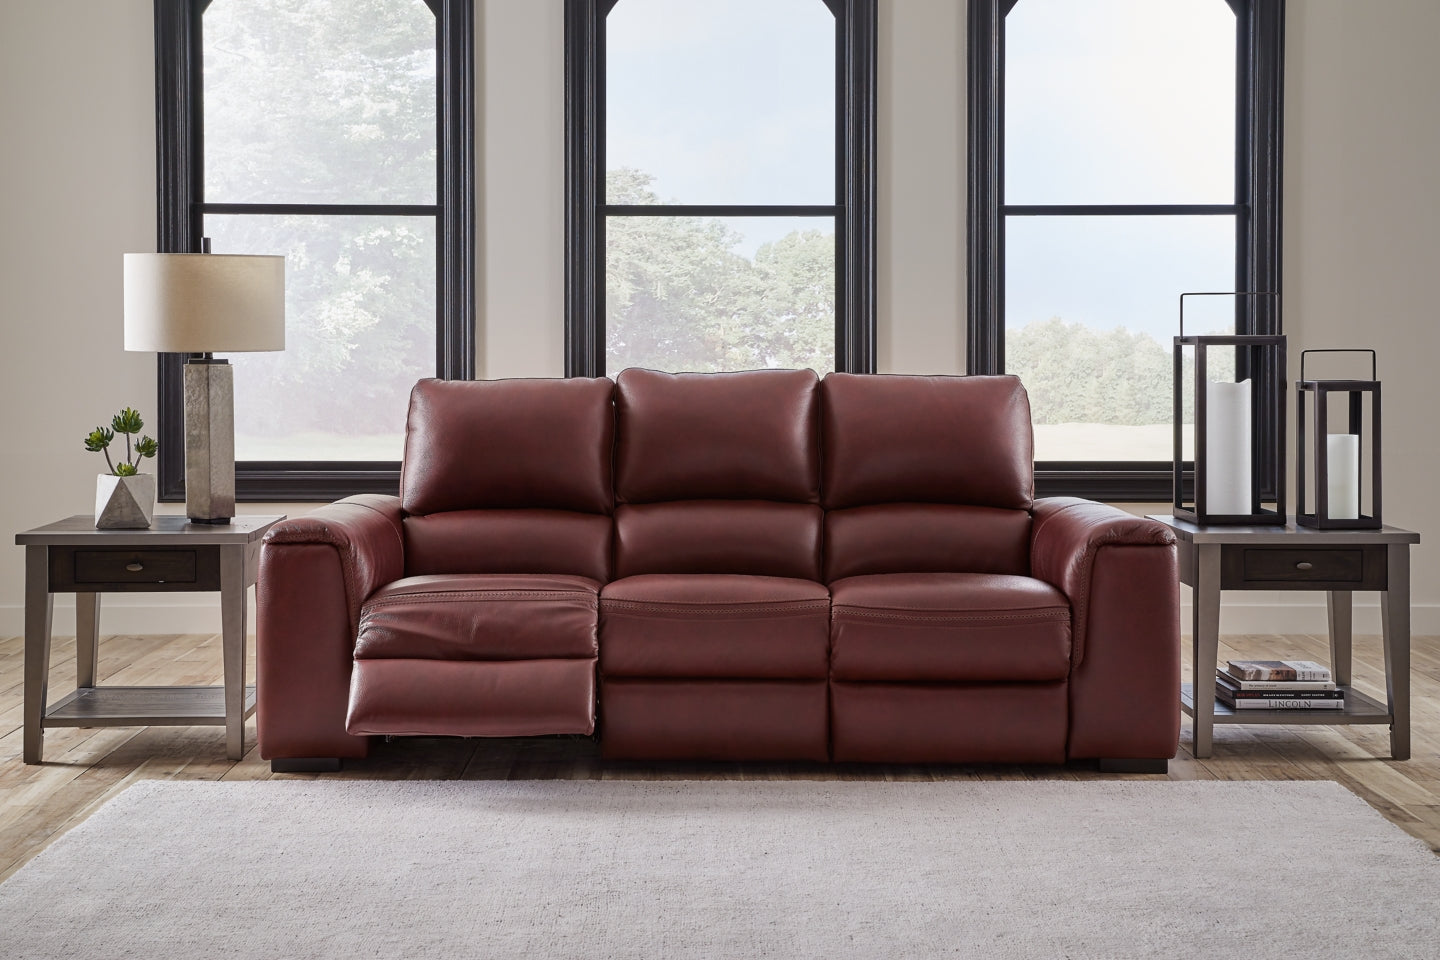 Alessandro Power Reclining Sofa - furniture place usa